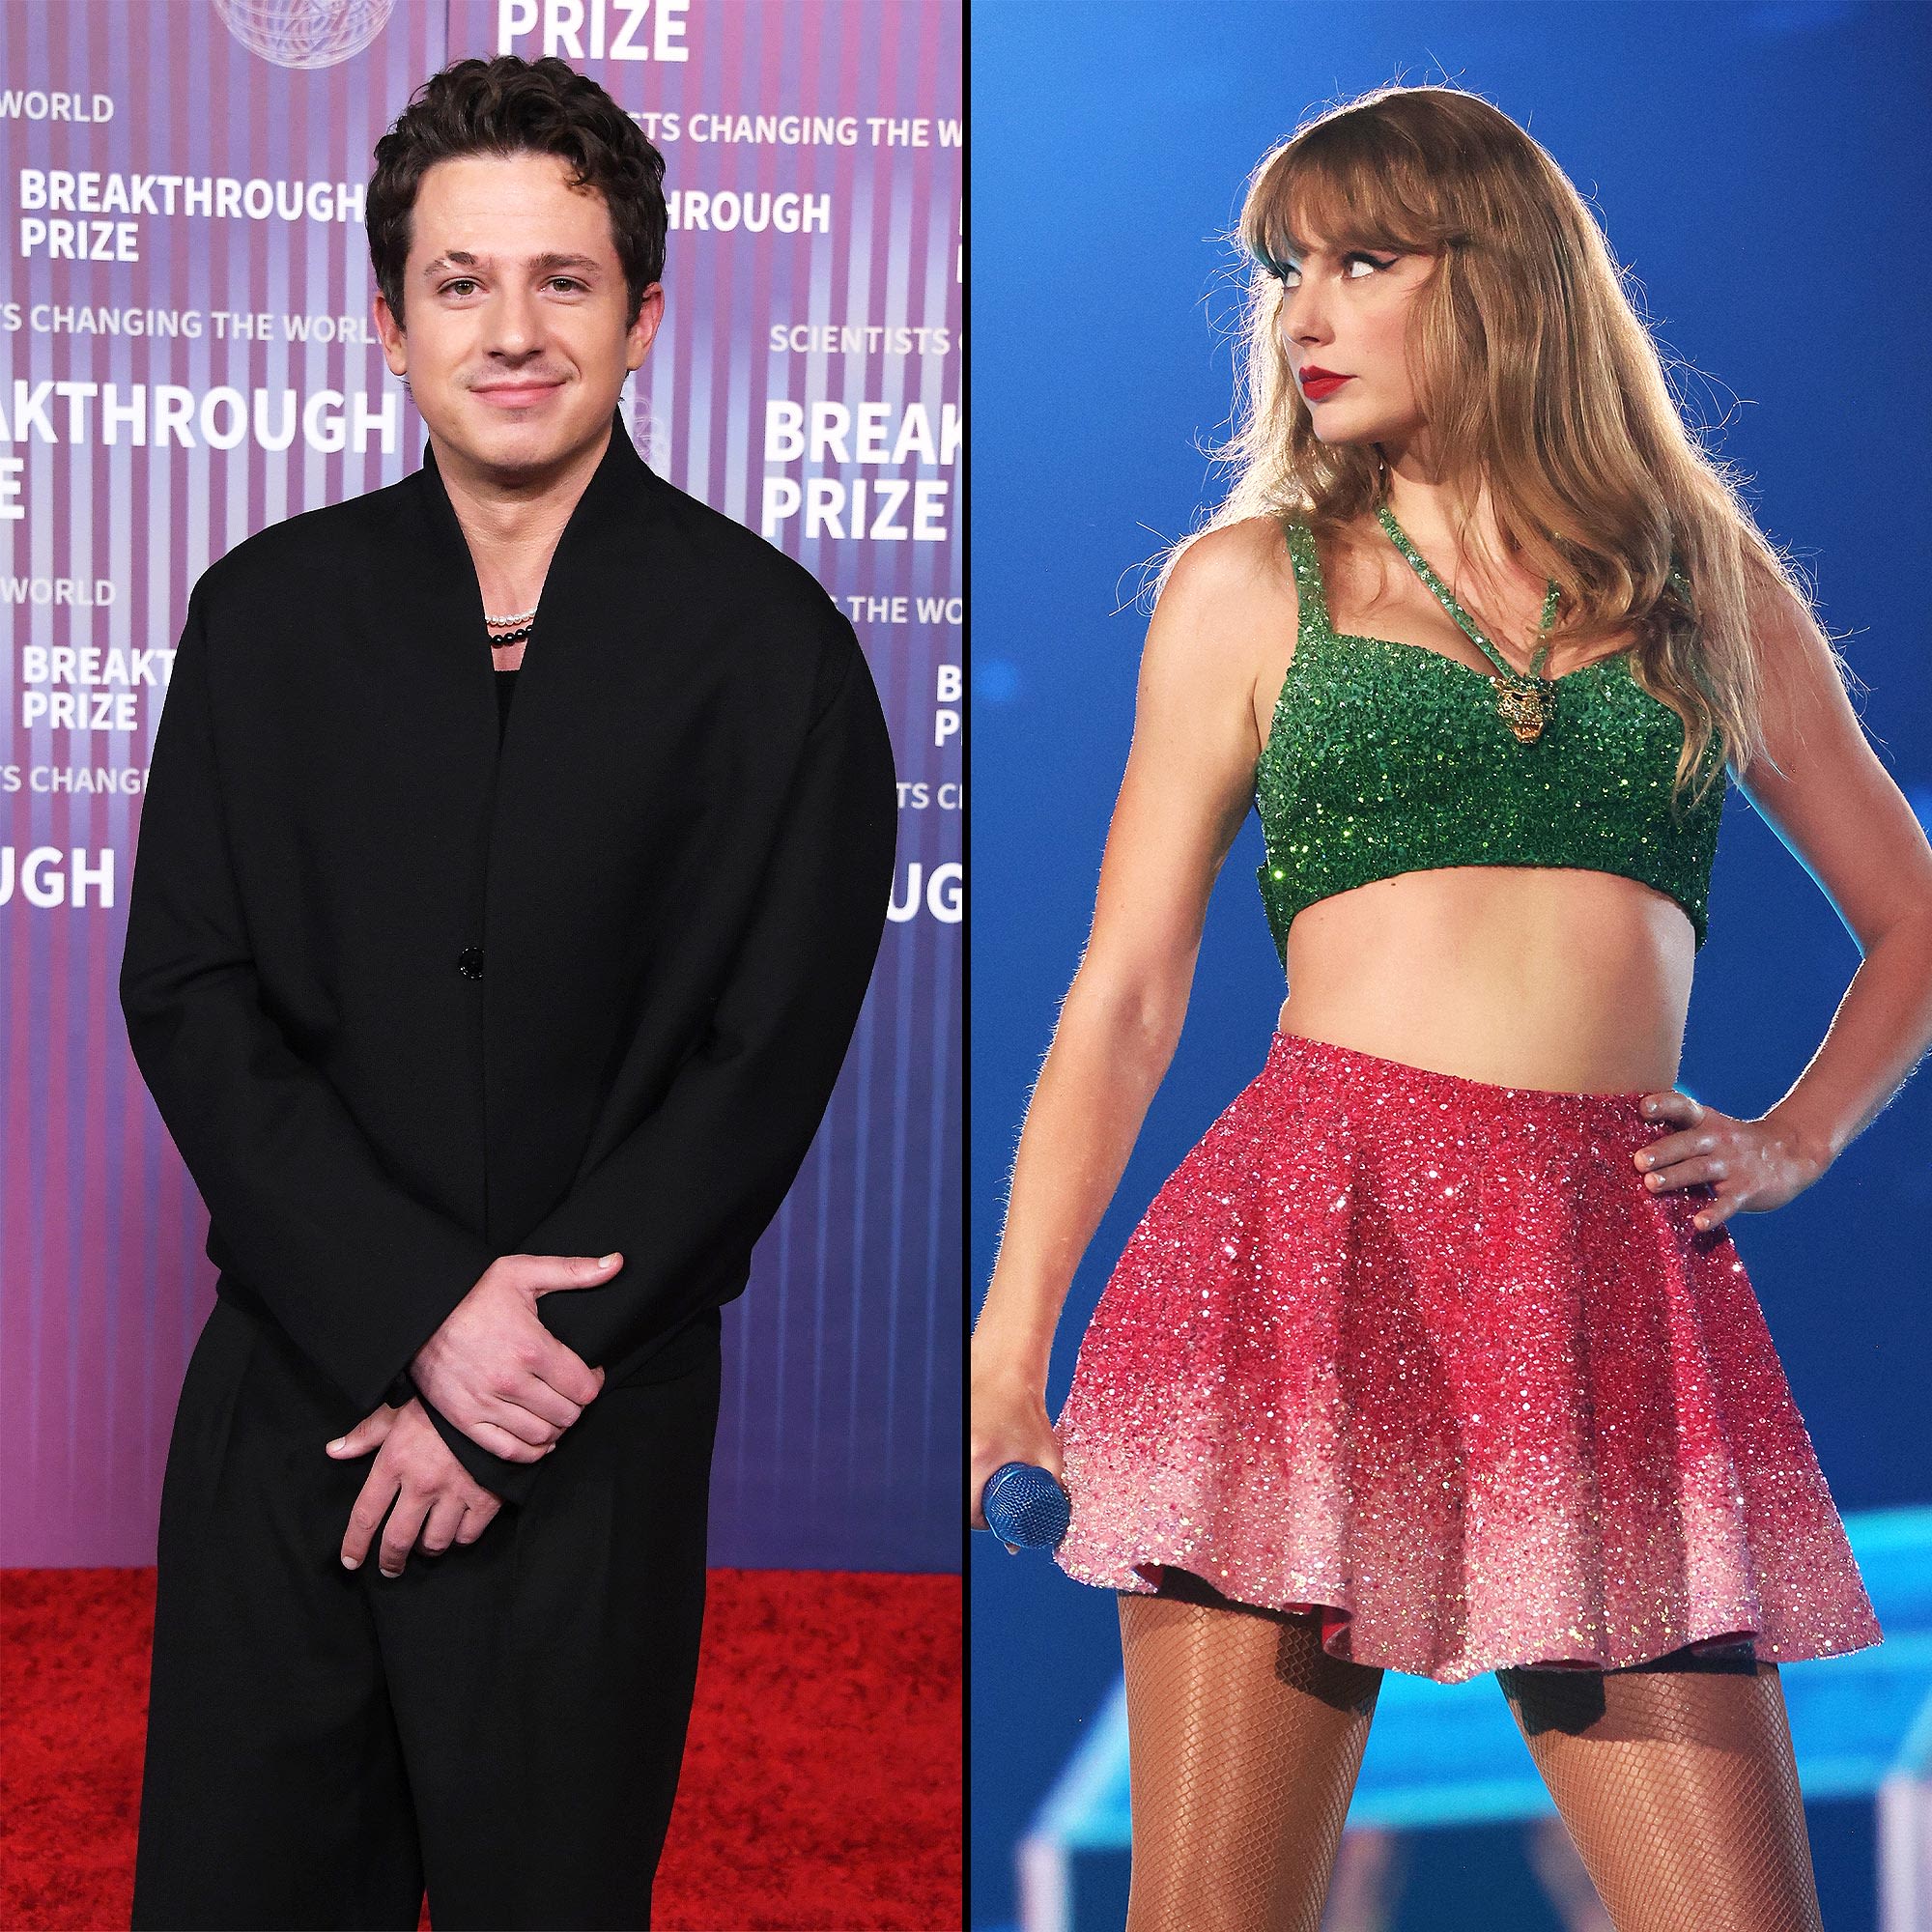 Charlie Puth Thanks Taylor Swift for ‘Letting Me Know’ to Drop New Music With ‘TTPD’ Shout-Out